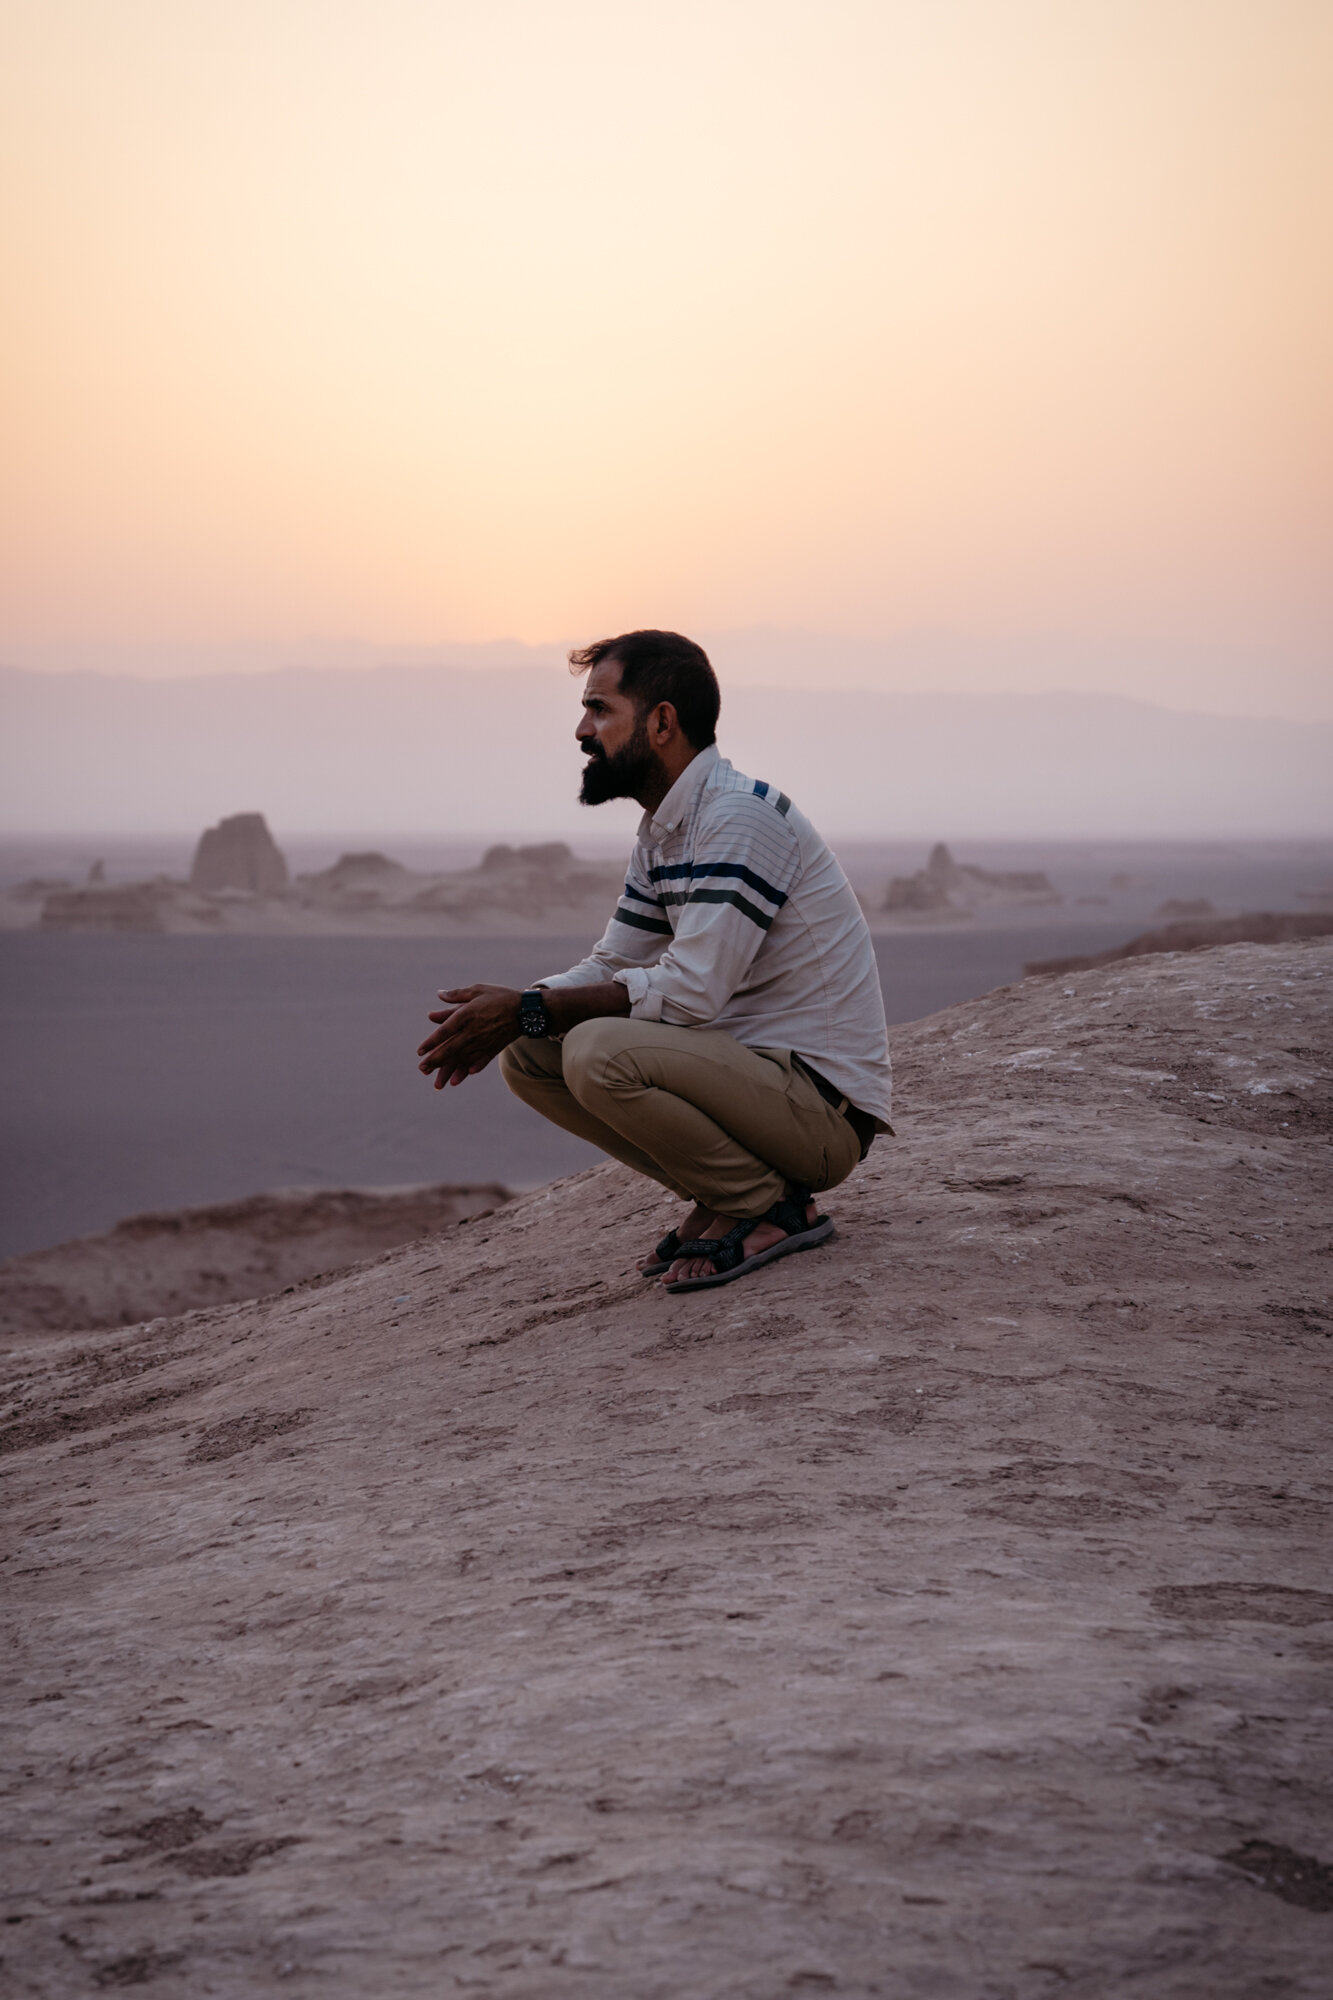  This was my guide who lives in the Lut desert and who told me he could never leave it 